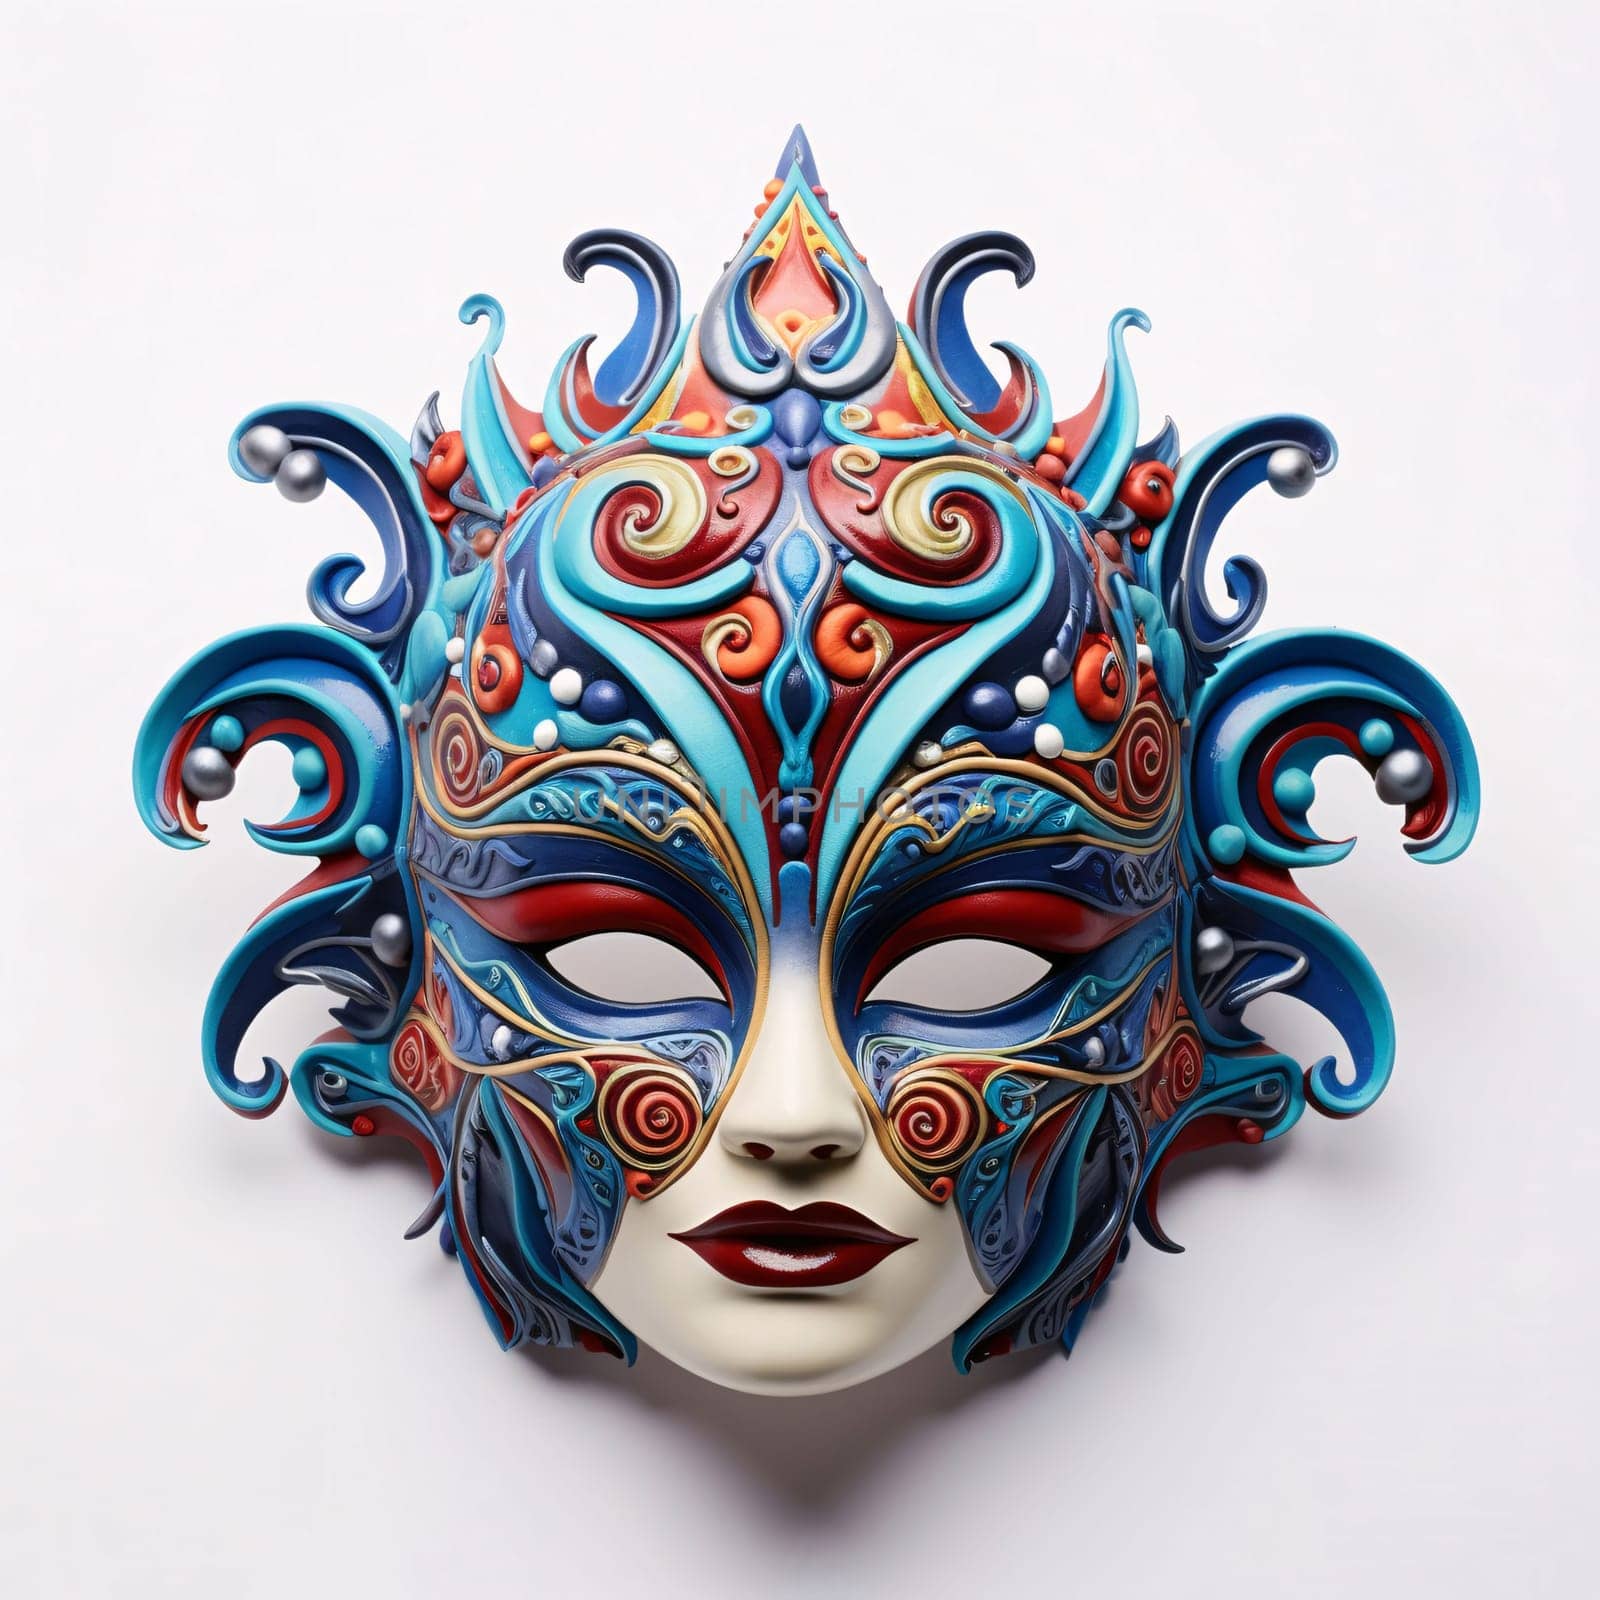 Carnival mask with blue, red decorations, white background. Carnival outfits, masks and decorations. by ThemesS